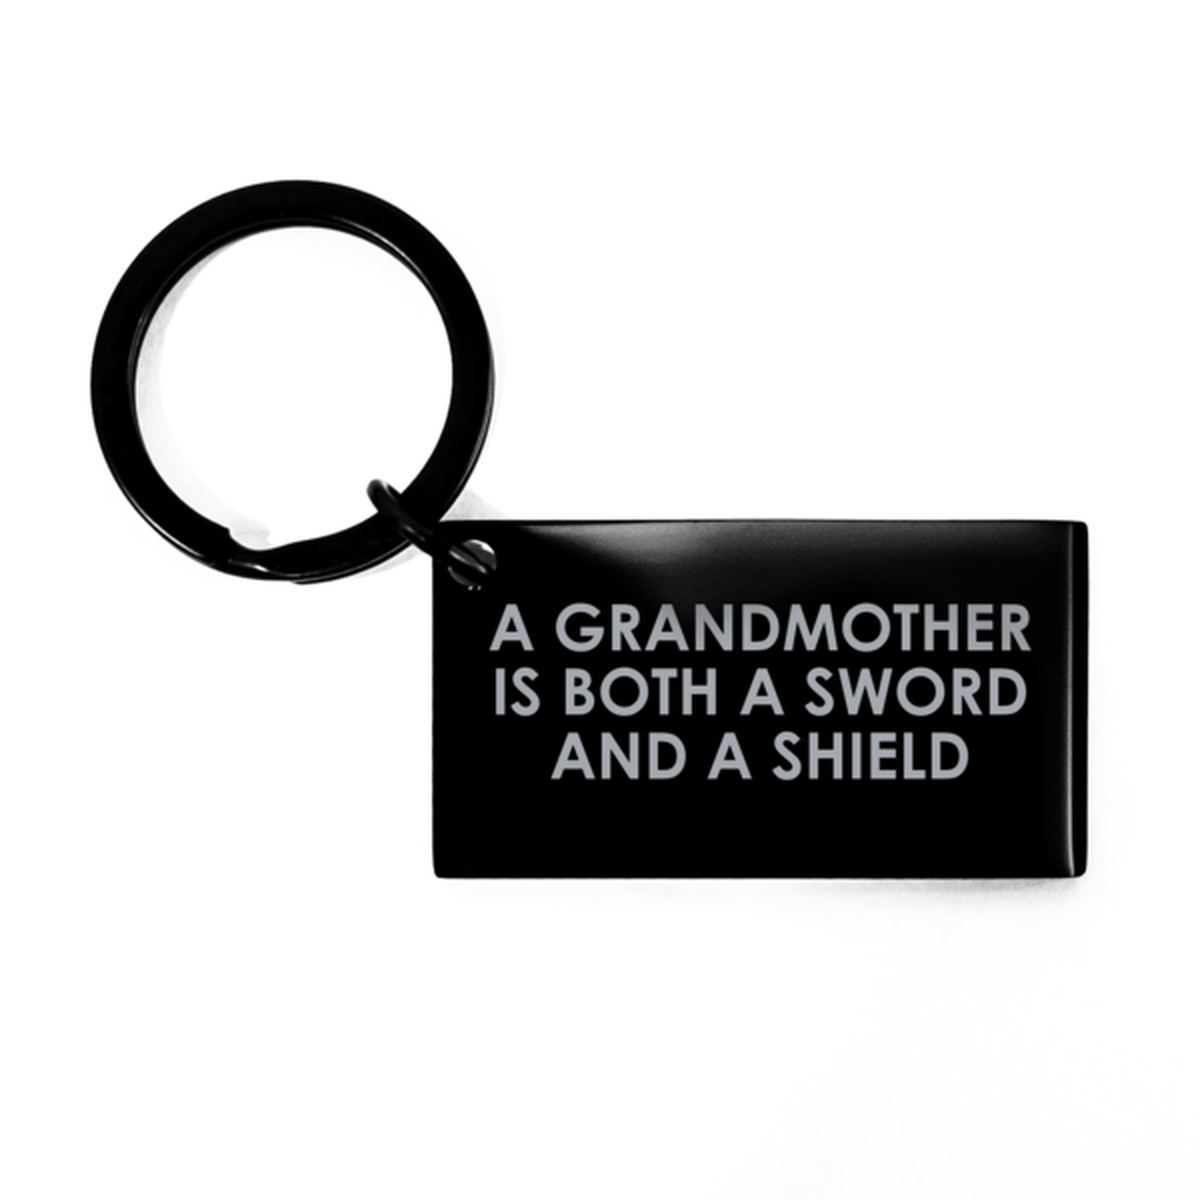 To My Grandma  Black Keychain, Sword And A Shield, Valentines Gifts For Grandma From Granddaughter, Birthday Gifts For Women